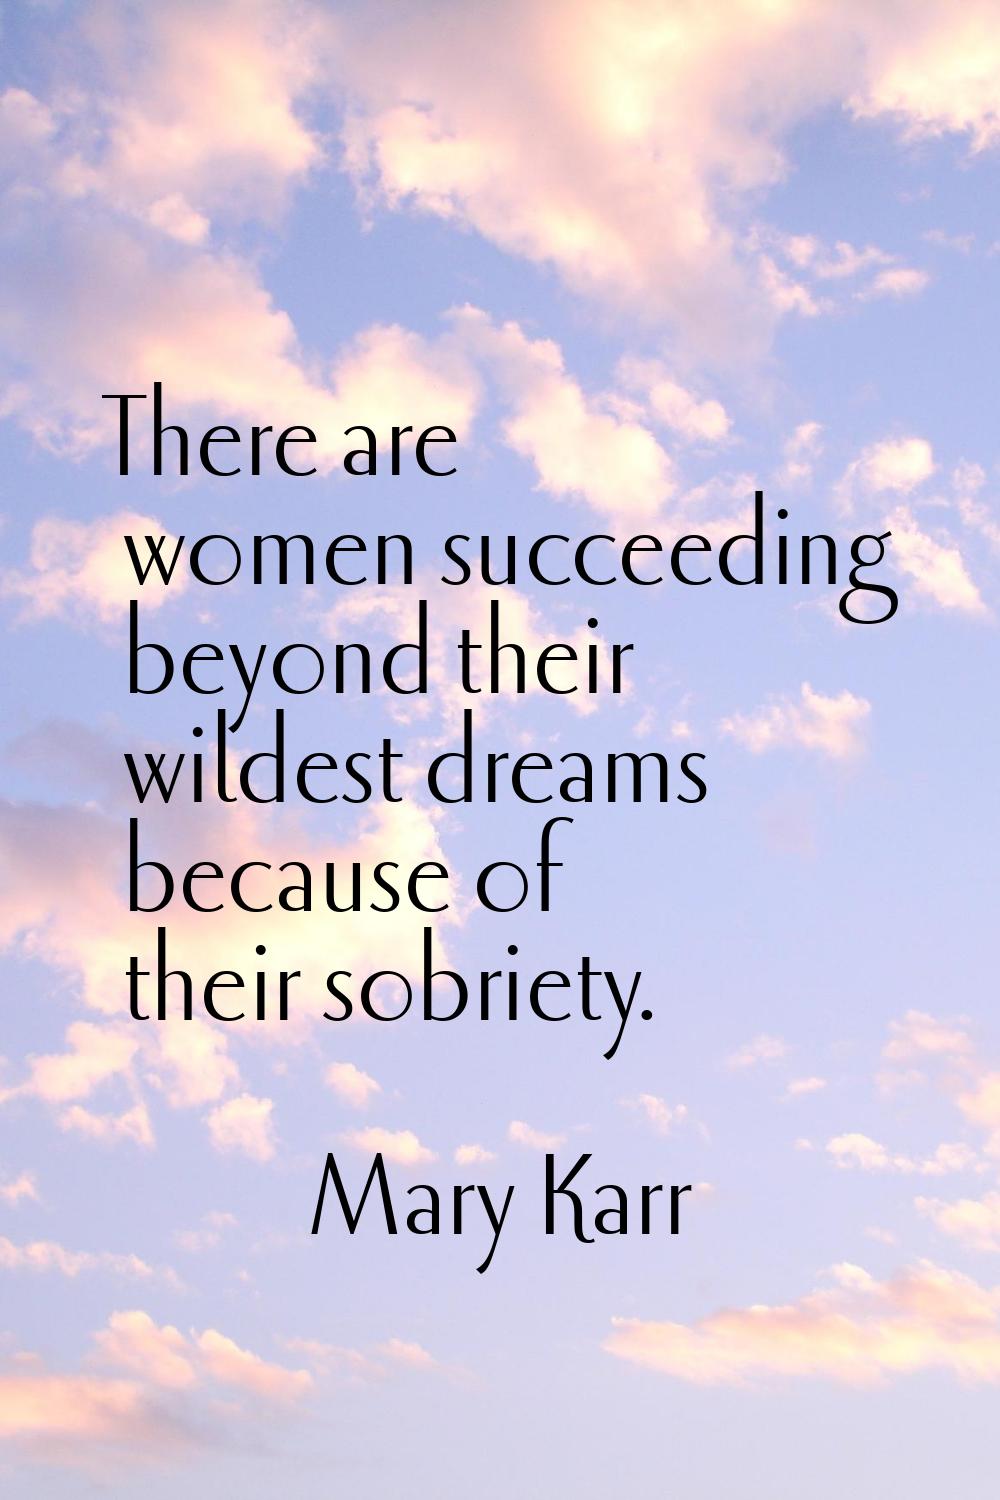 There are women succeeding beyond their wildest dreams because of their sobriety.